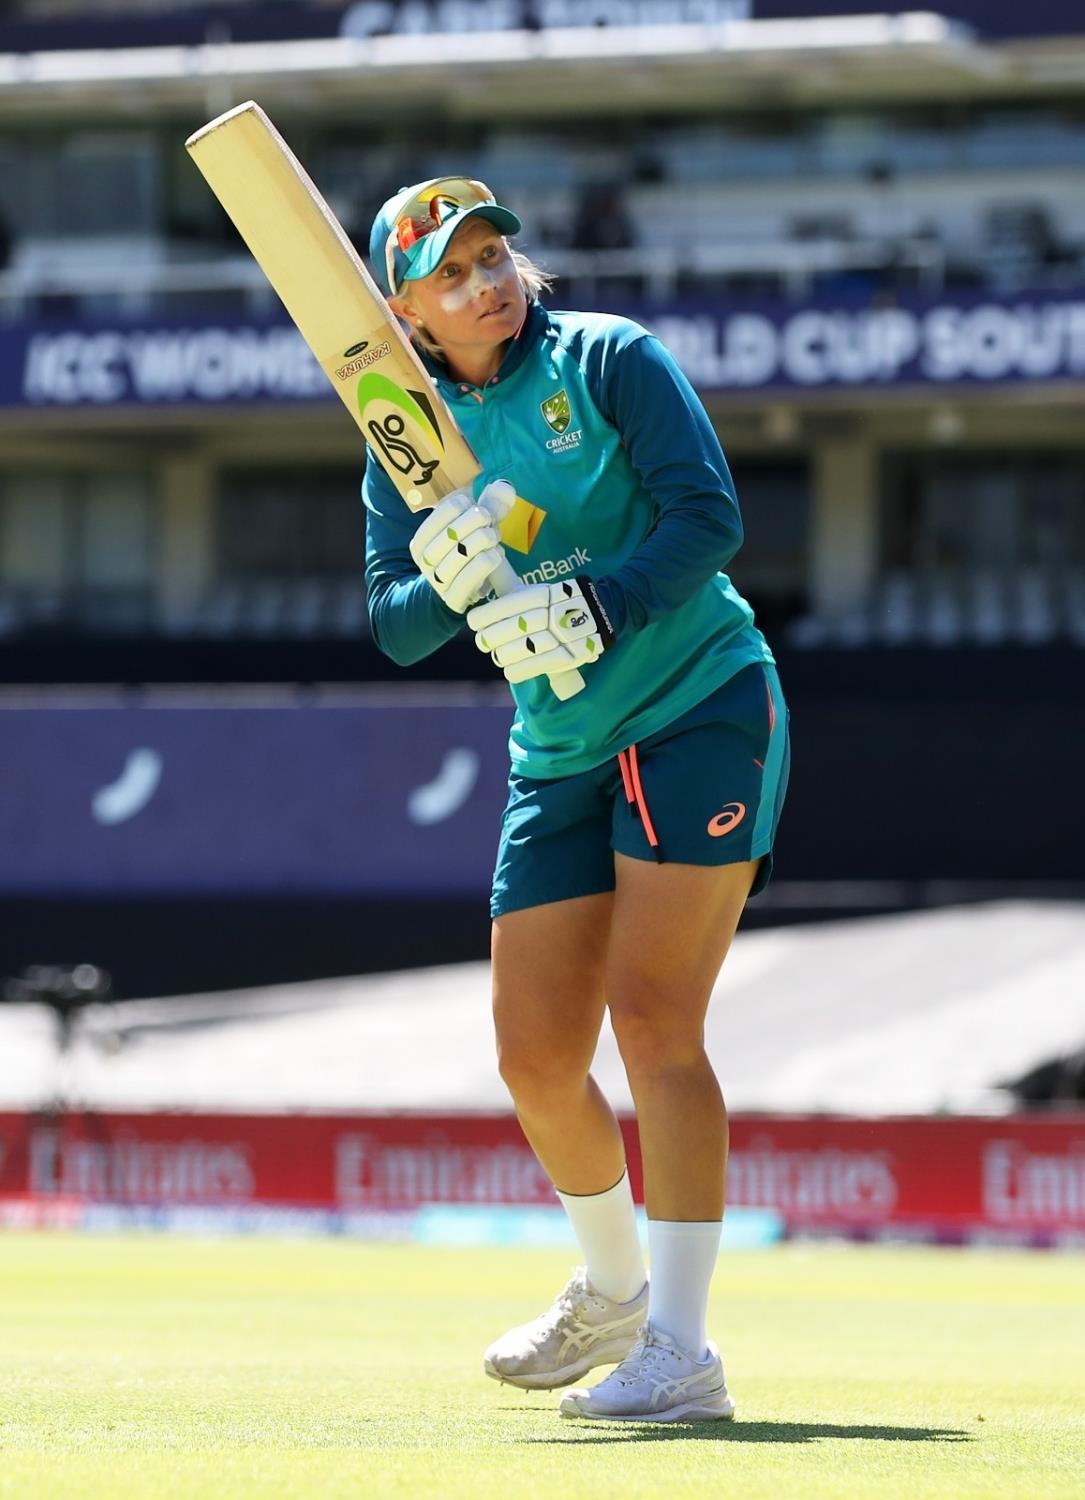 Australia Has Really Good Spin Attack, Prepare Spinning Wickets At Your Peril, Says Alyssa Healy Ahead Of Test V India